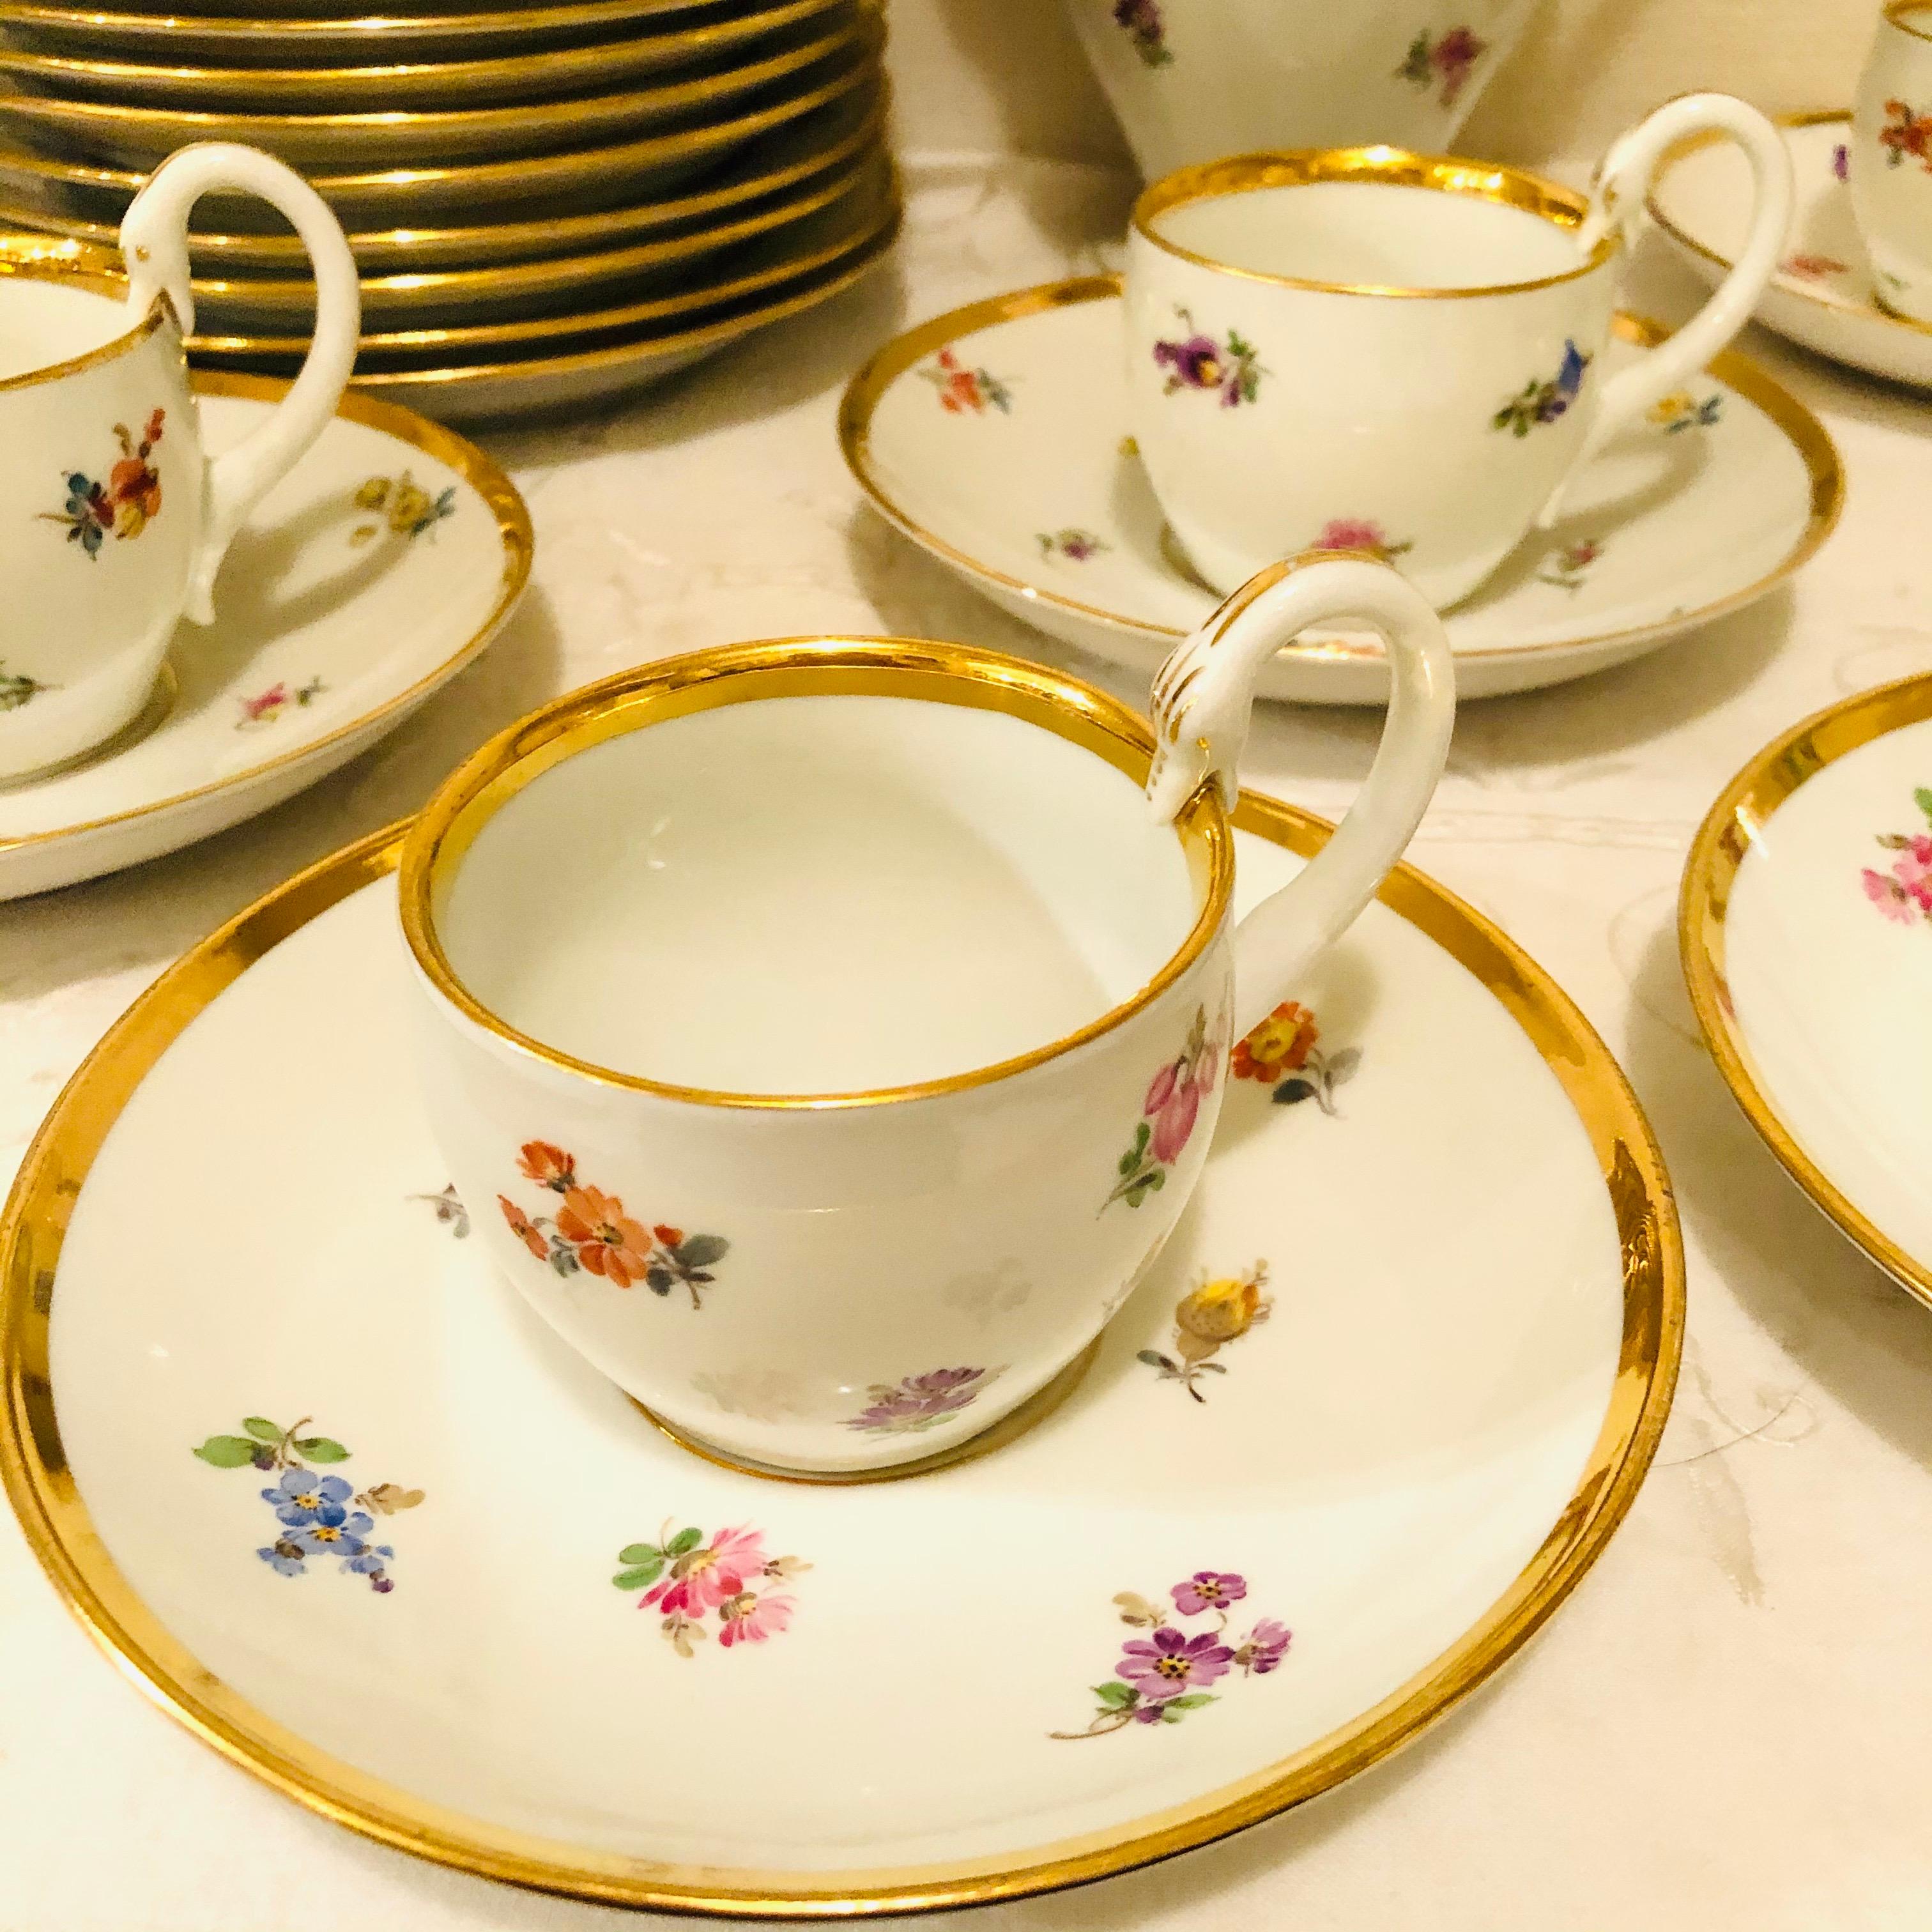 Hand-Painted Meissen Streublumen Tea Set for 10 with Cups and Saucers, Cake Plates and Teapot